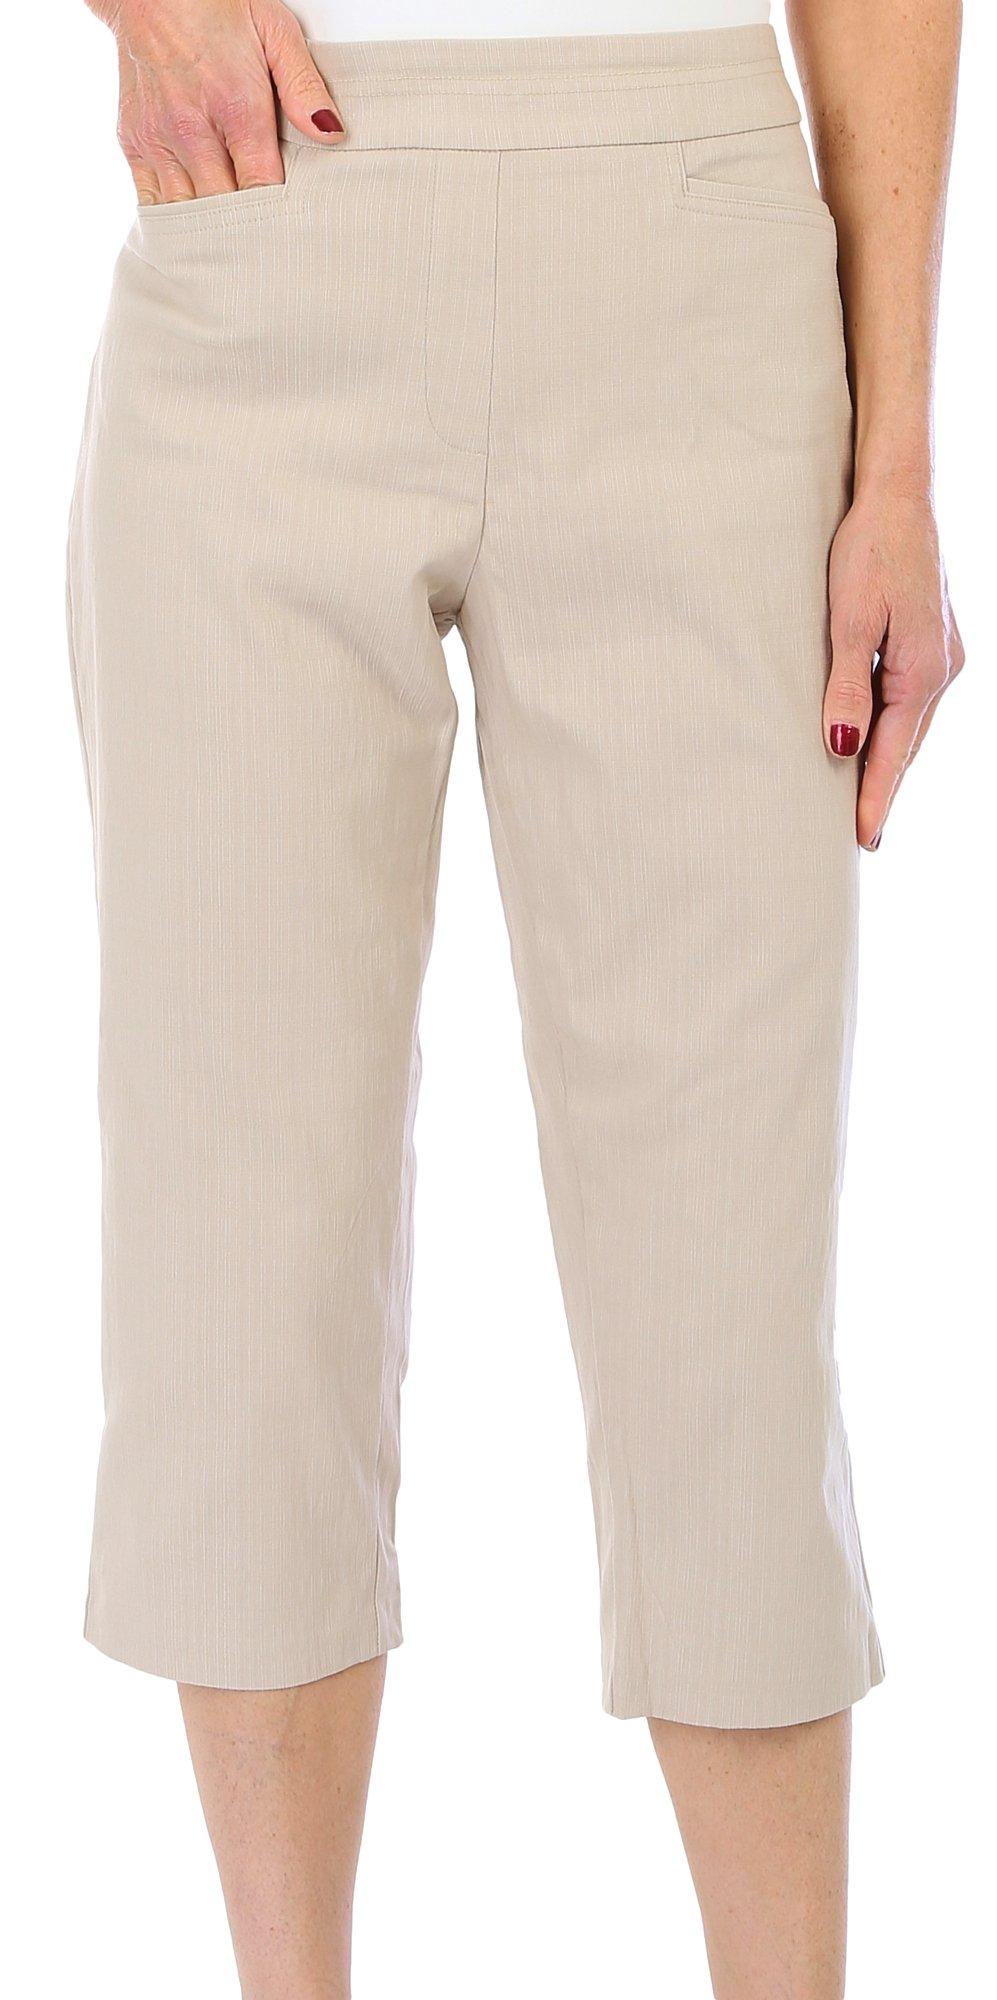 Jenna Rose Womens Solid Pull On Capris